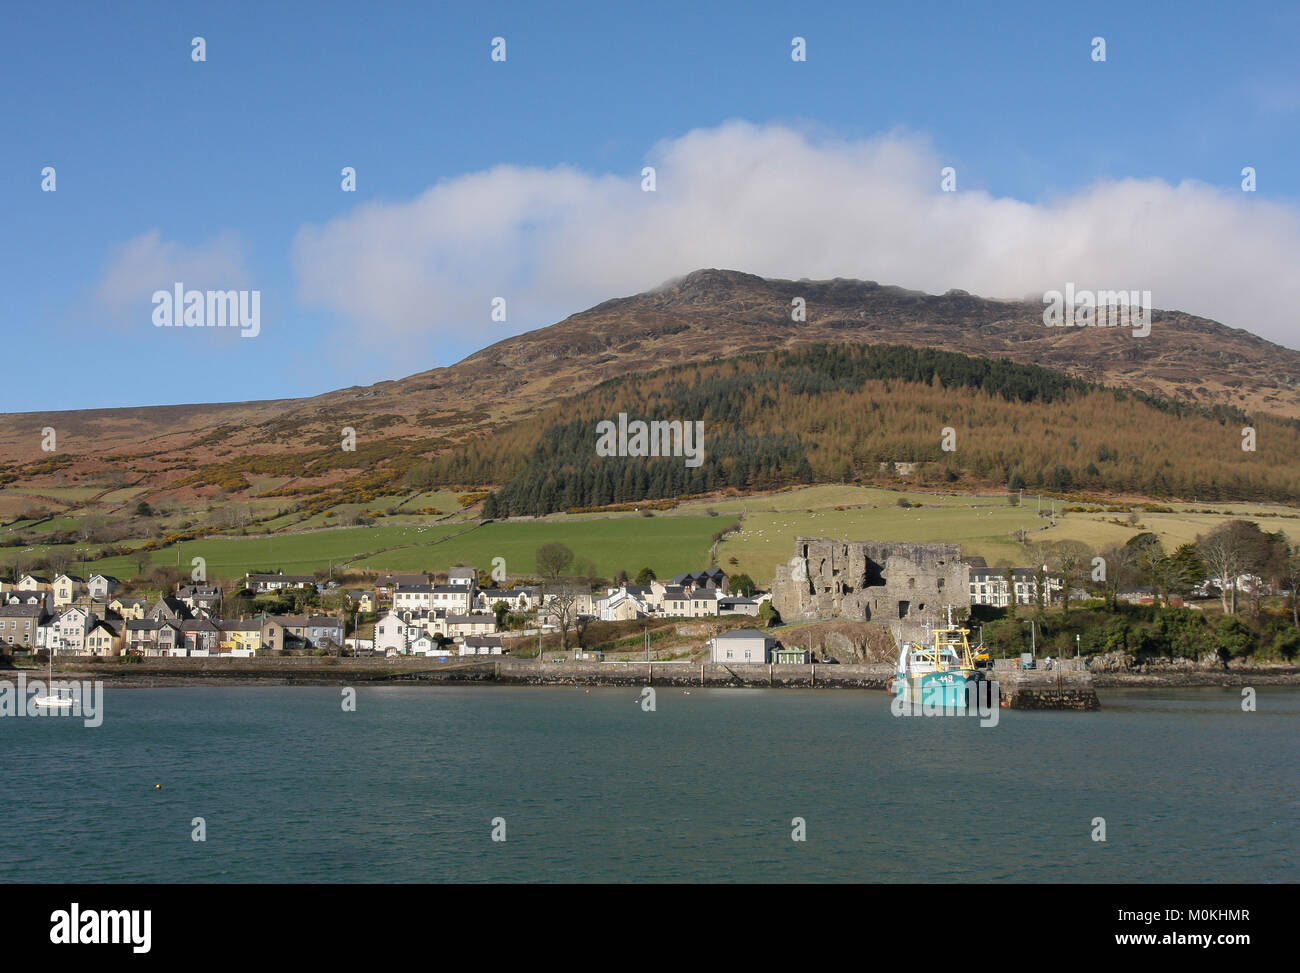 The coastal town of Carlingford, County Louth Ireland. King John's castle and Carlingford Harbour sit at the base of Slieve Foy, Cooley Peninsula. Stock Photo